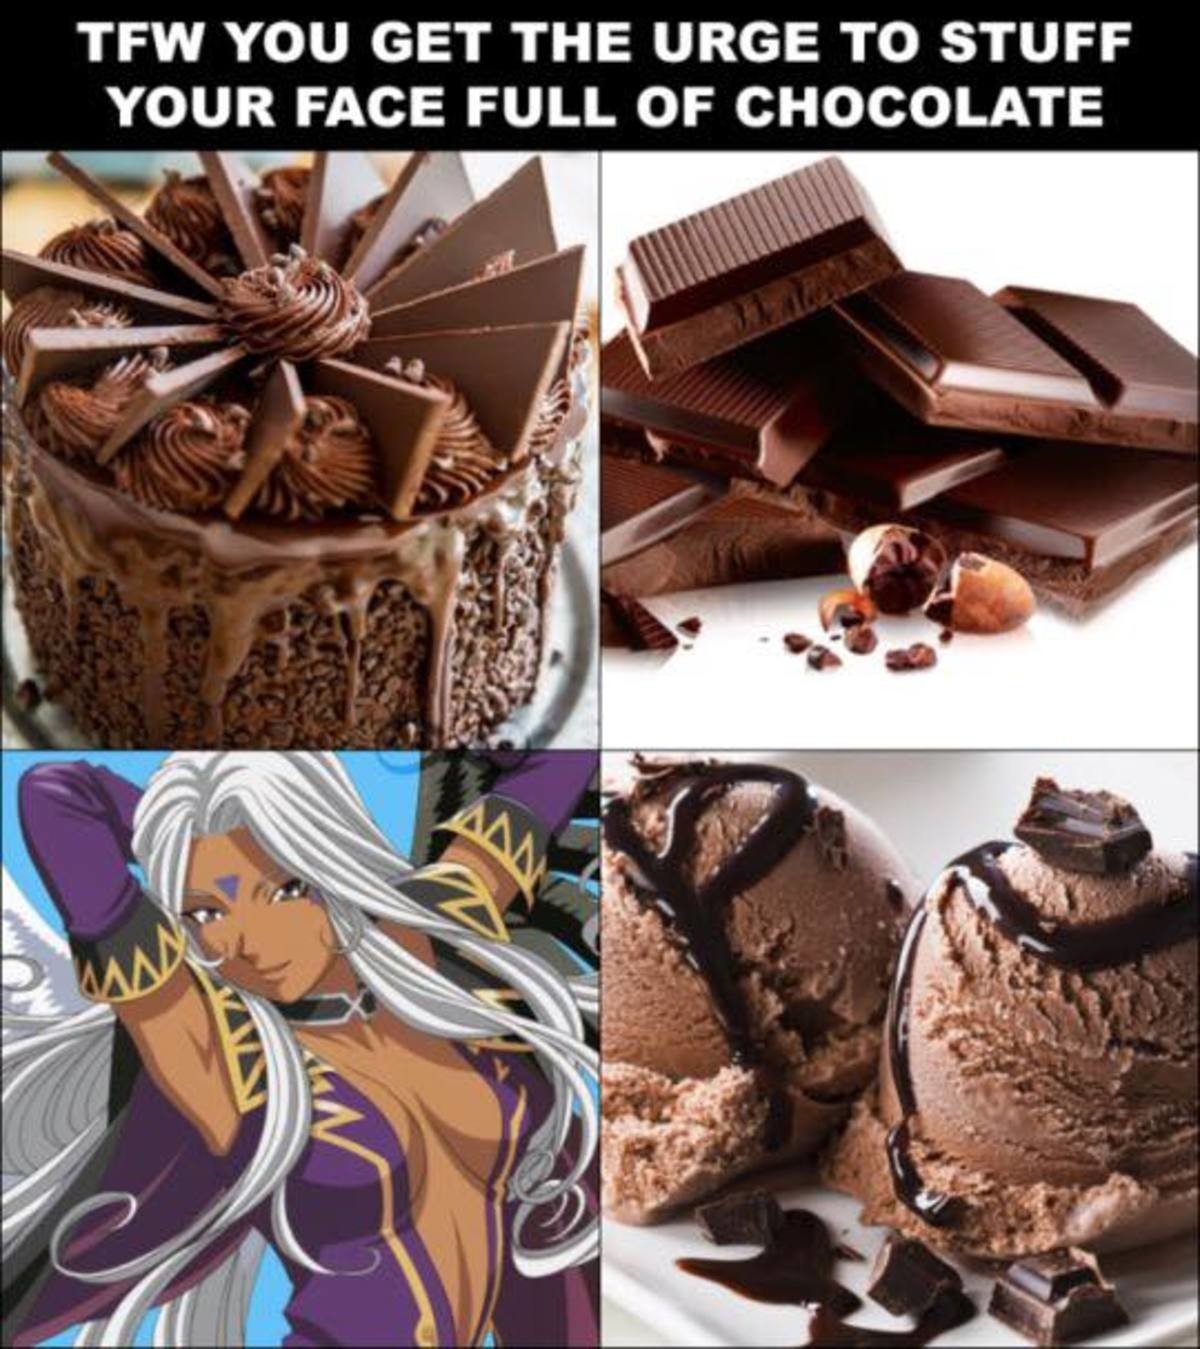 Im in lov wit da choco. join list: AraSfwPosts (58 subs)Mention Clicks: 3173Msgs Sent: 893Mention History.. Drunk Urd